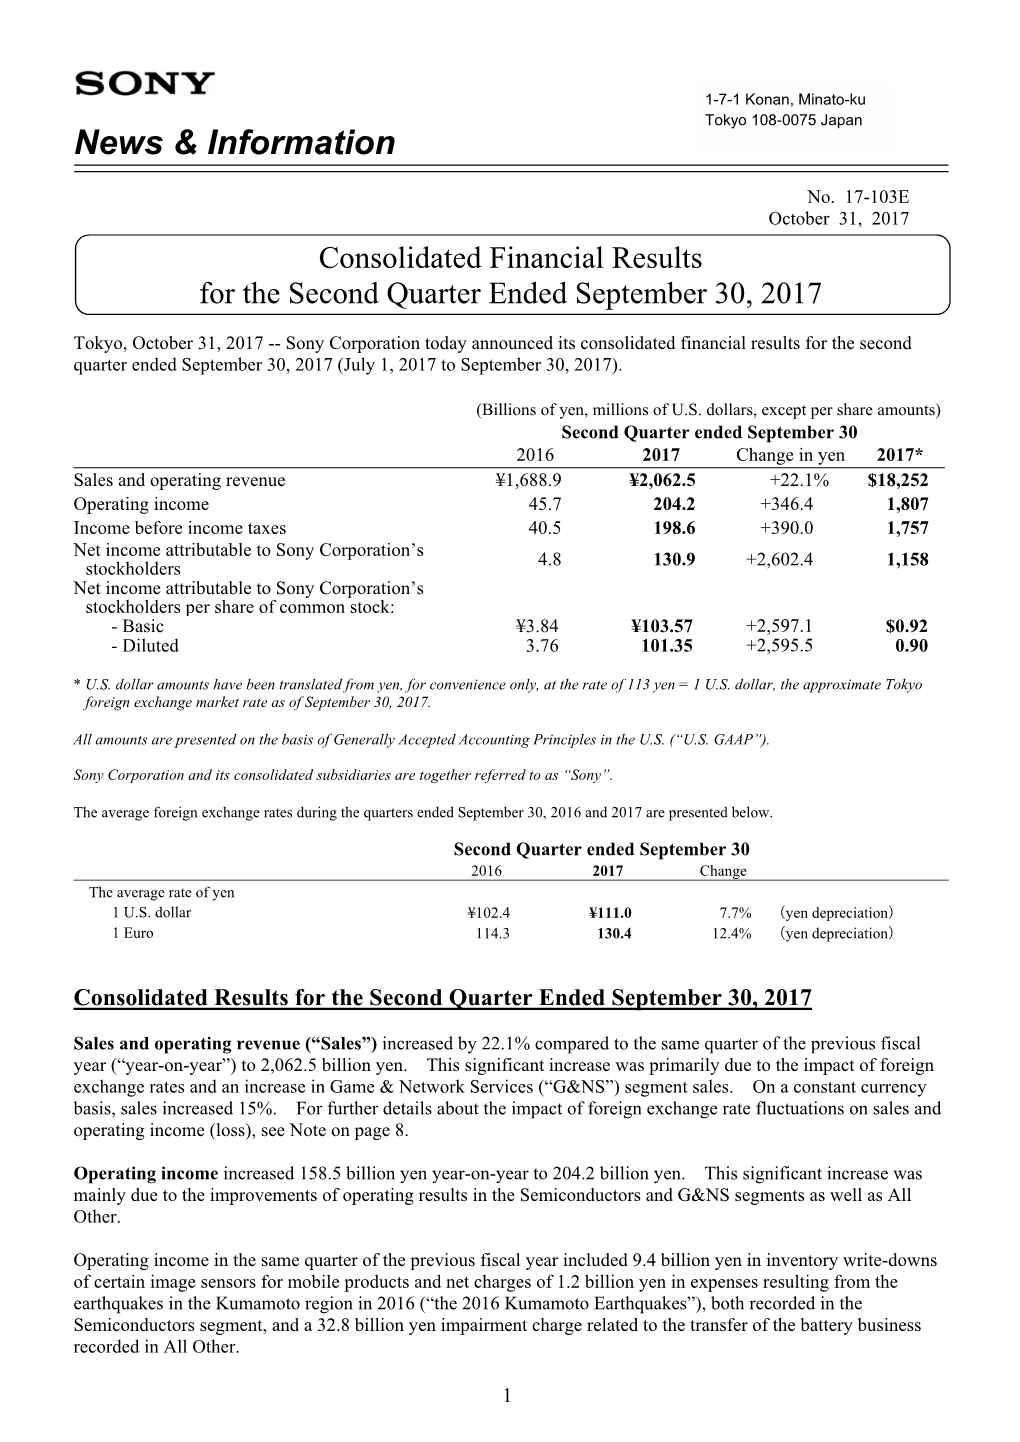 Consolidated Financial Results for the Second Quarter Ended September 30, 2017